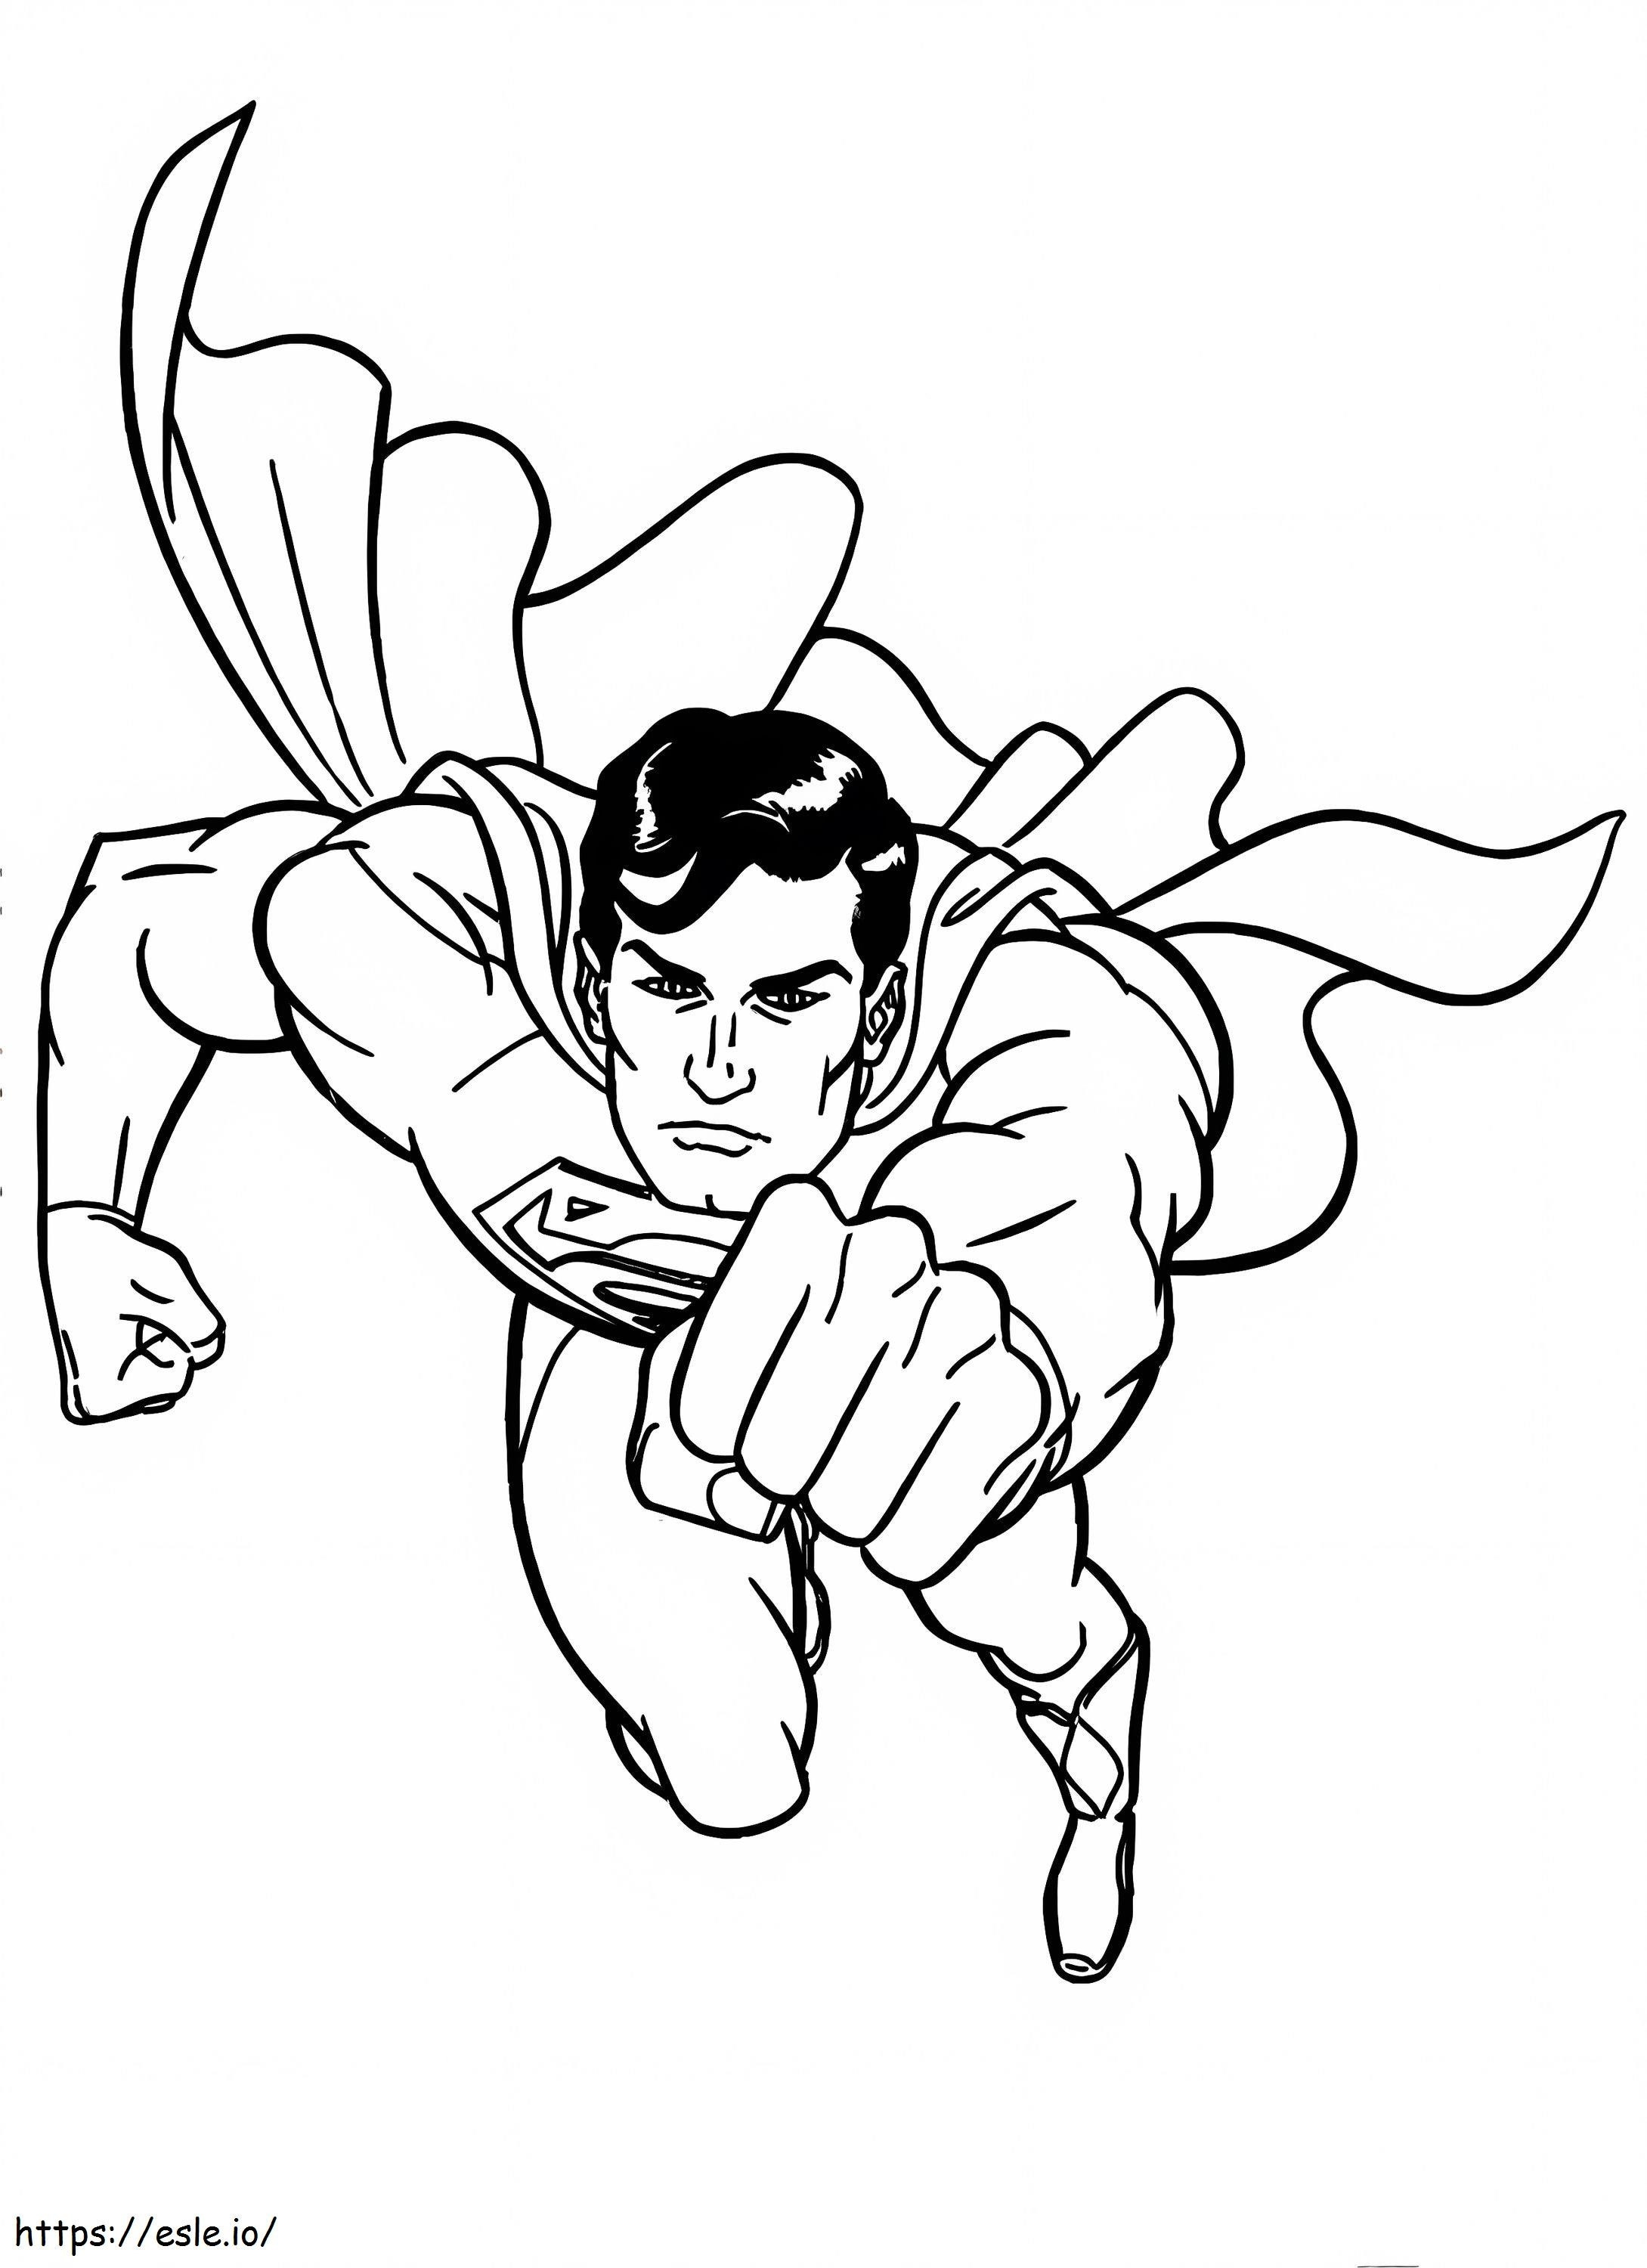 Super Flying Man 2 coloring page